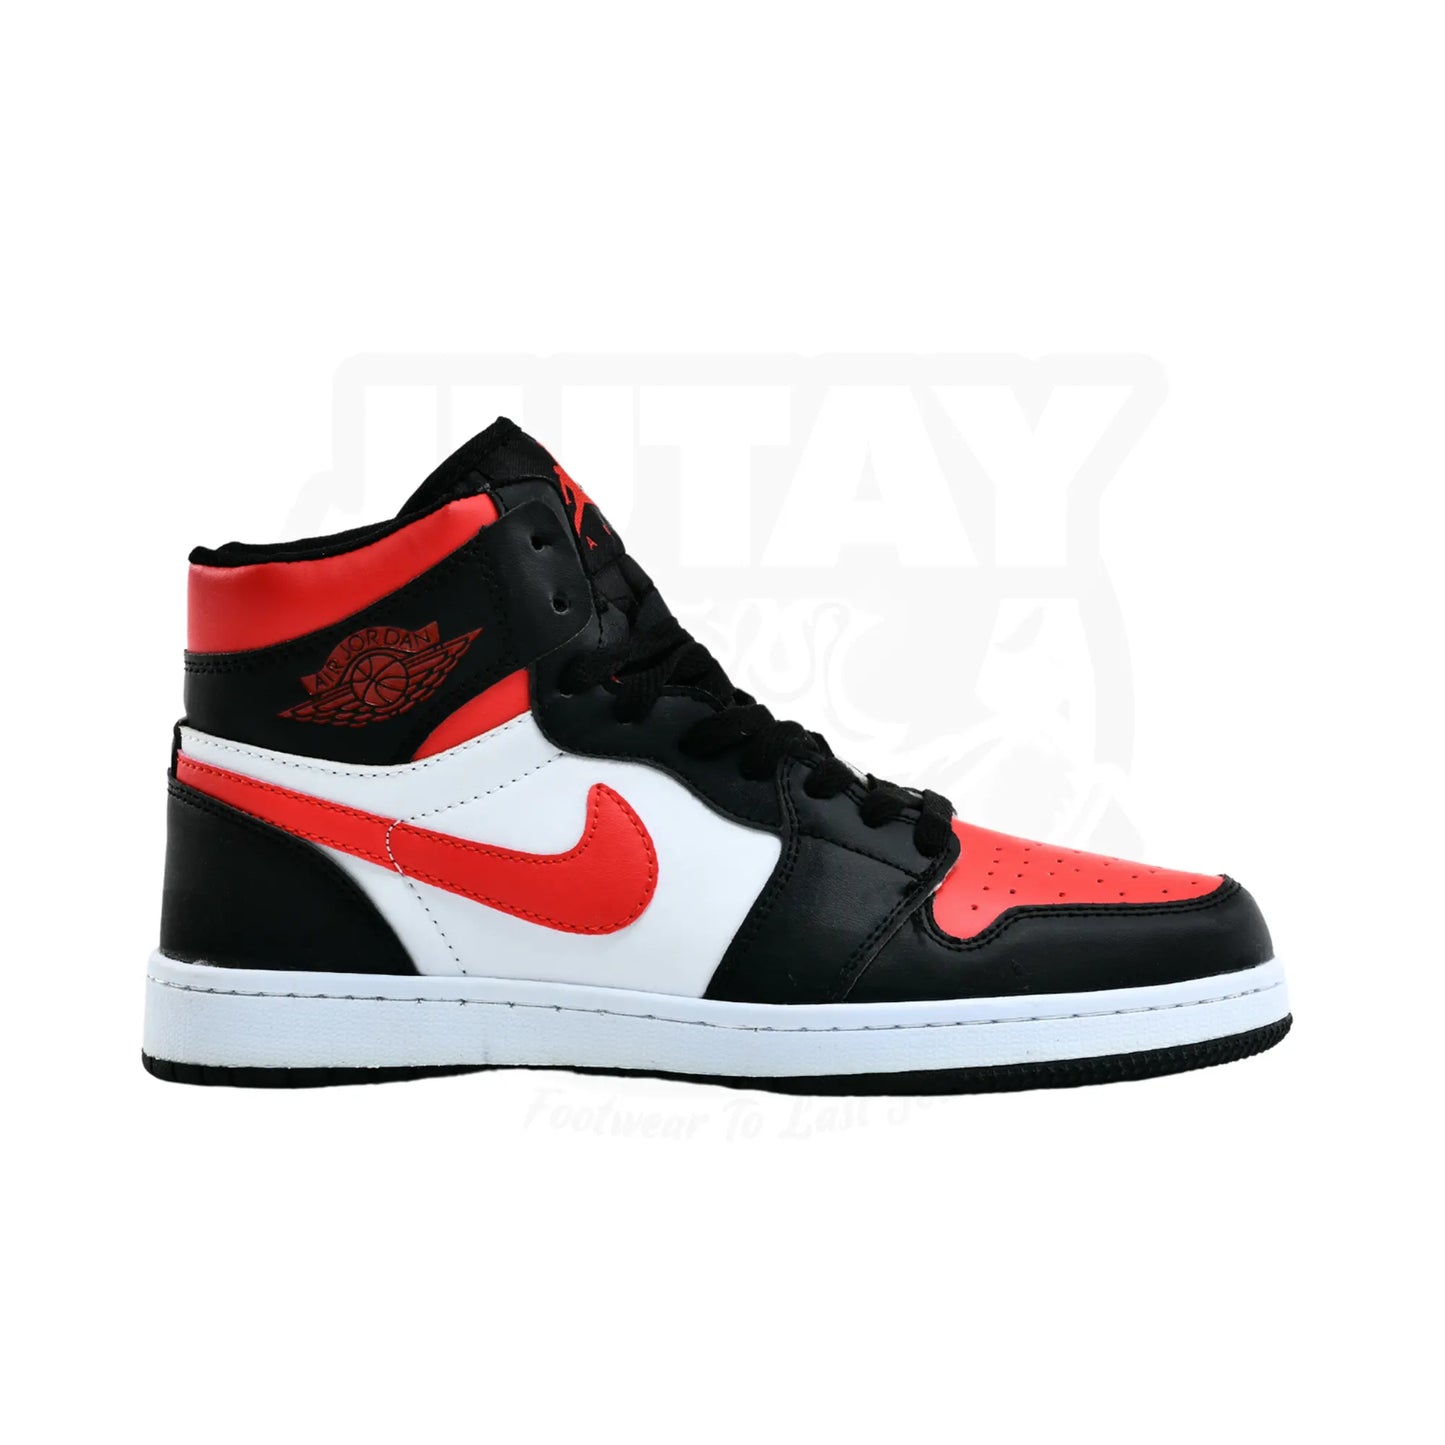 AJ 1 HIGHS - FIRE RED